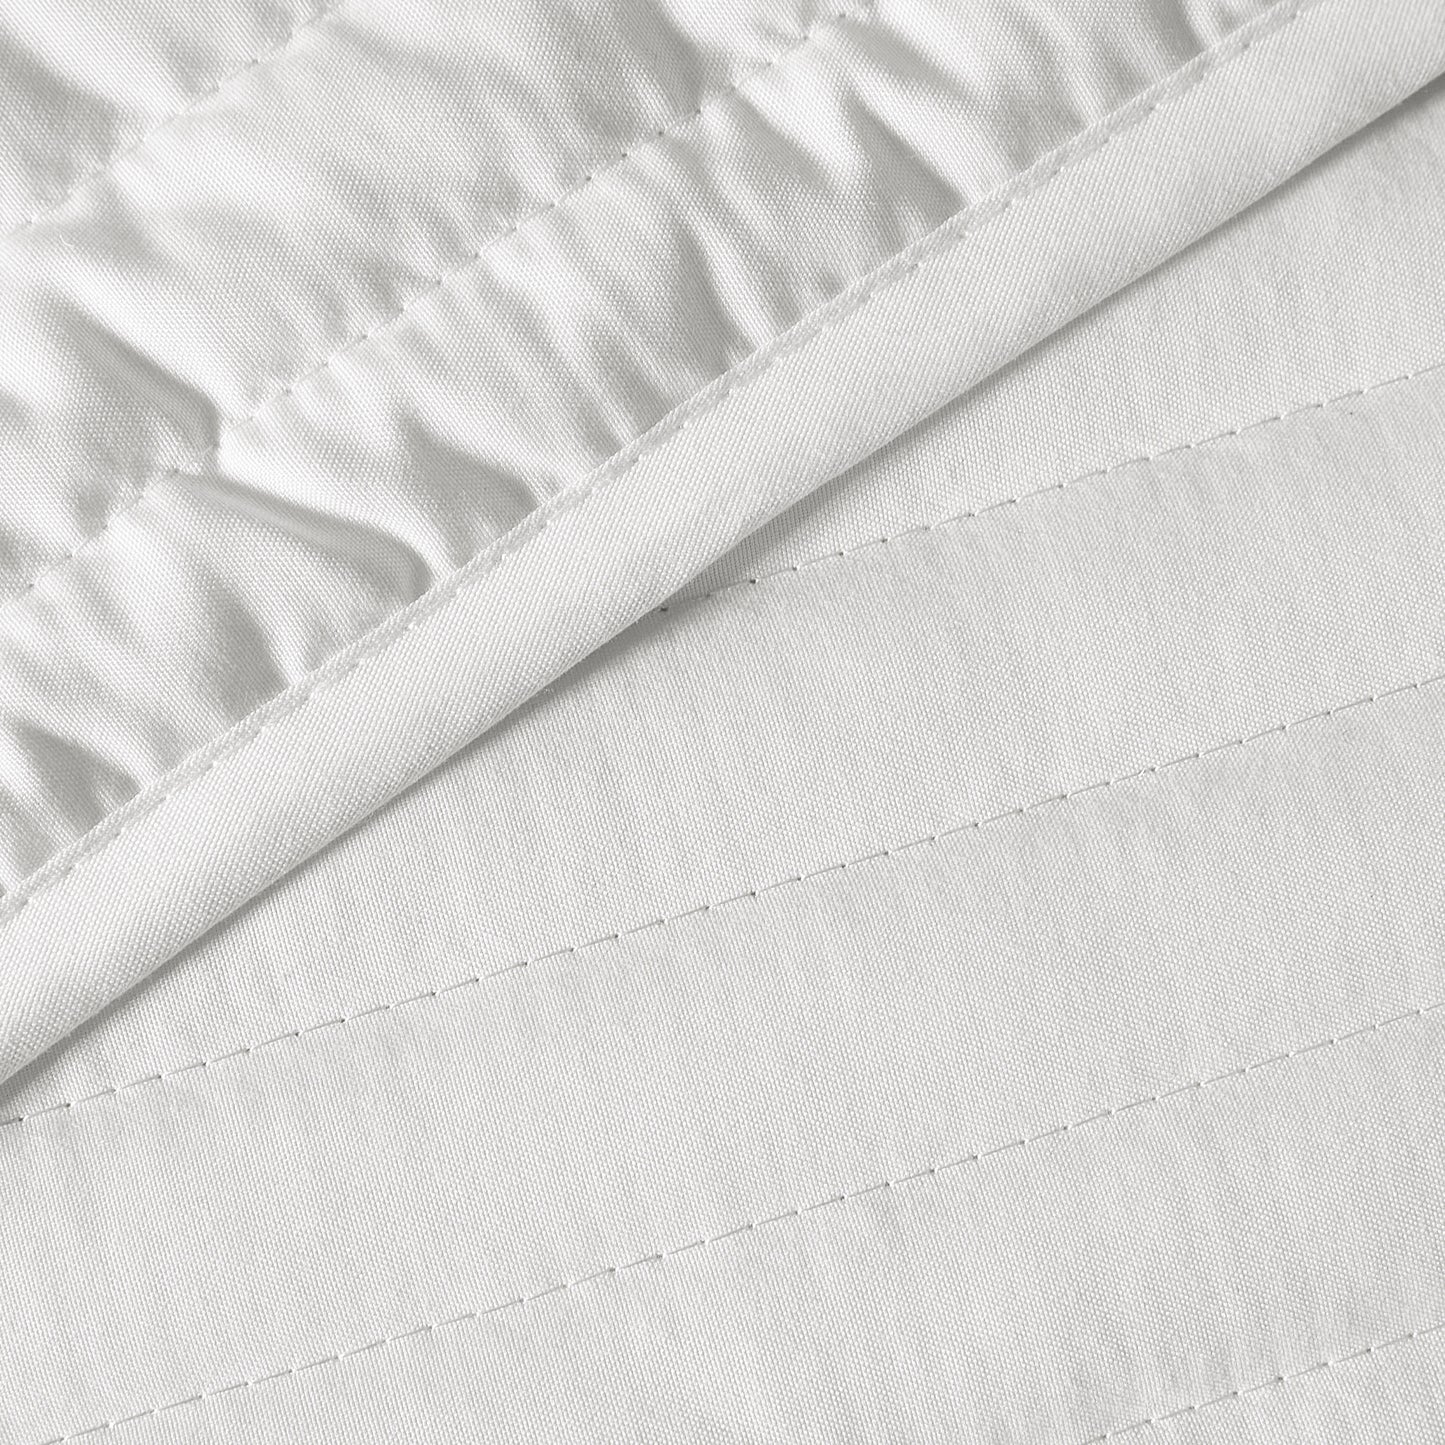 Bianca White Quilted Lines Bedspread (220cm x 230cm)